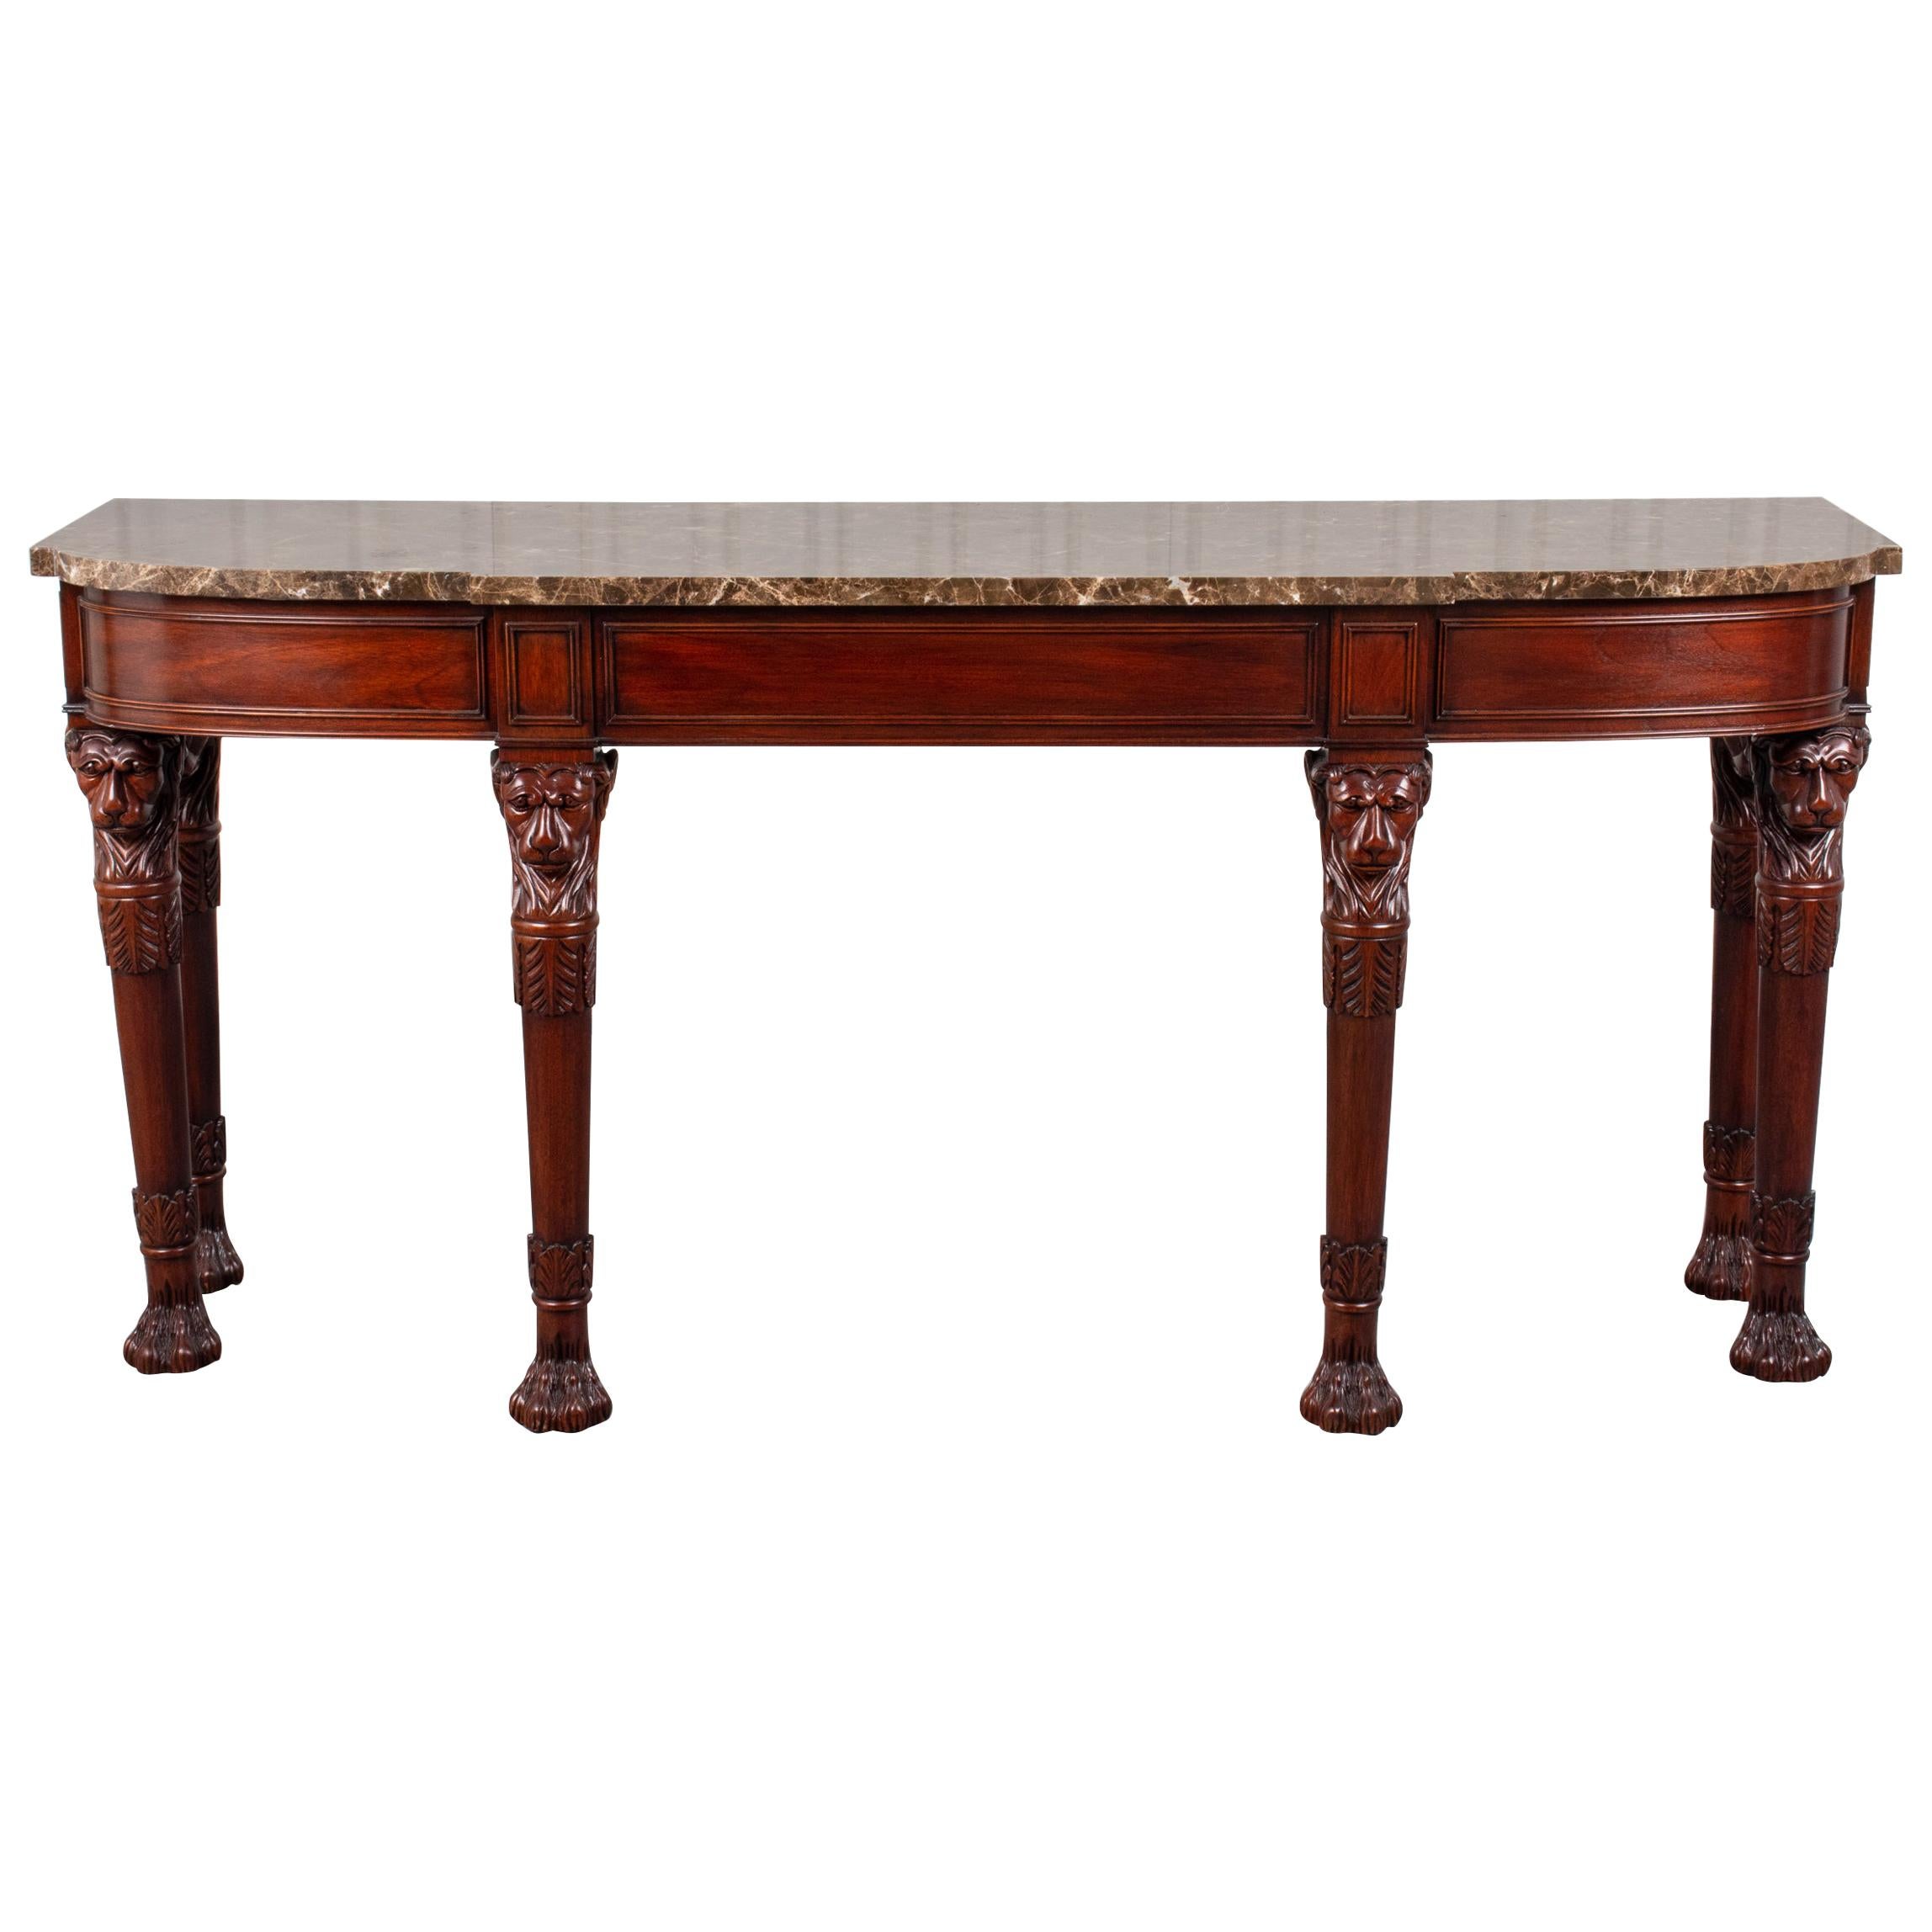 English Regency Style Mahogany Console Table with Marble Top and Lion Heads